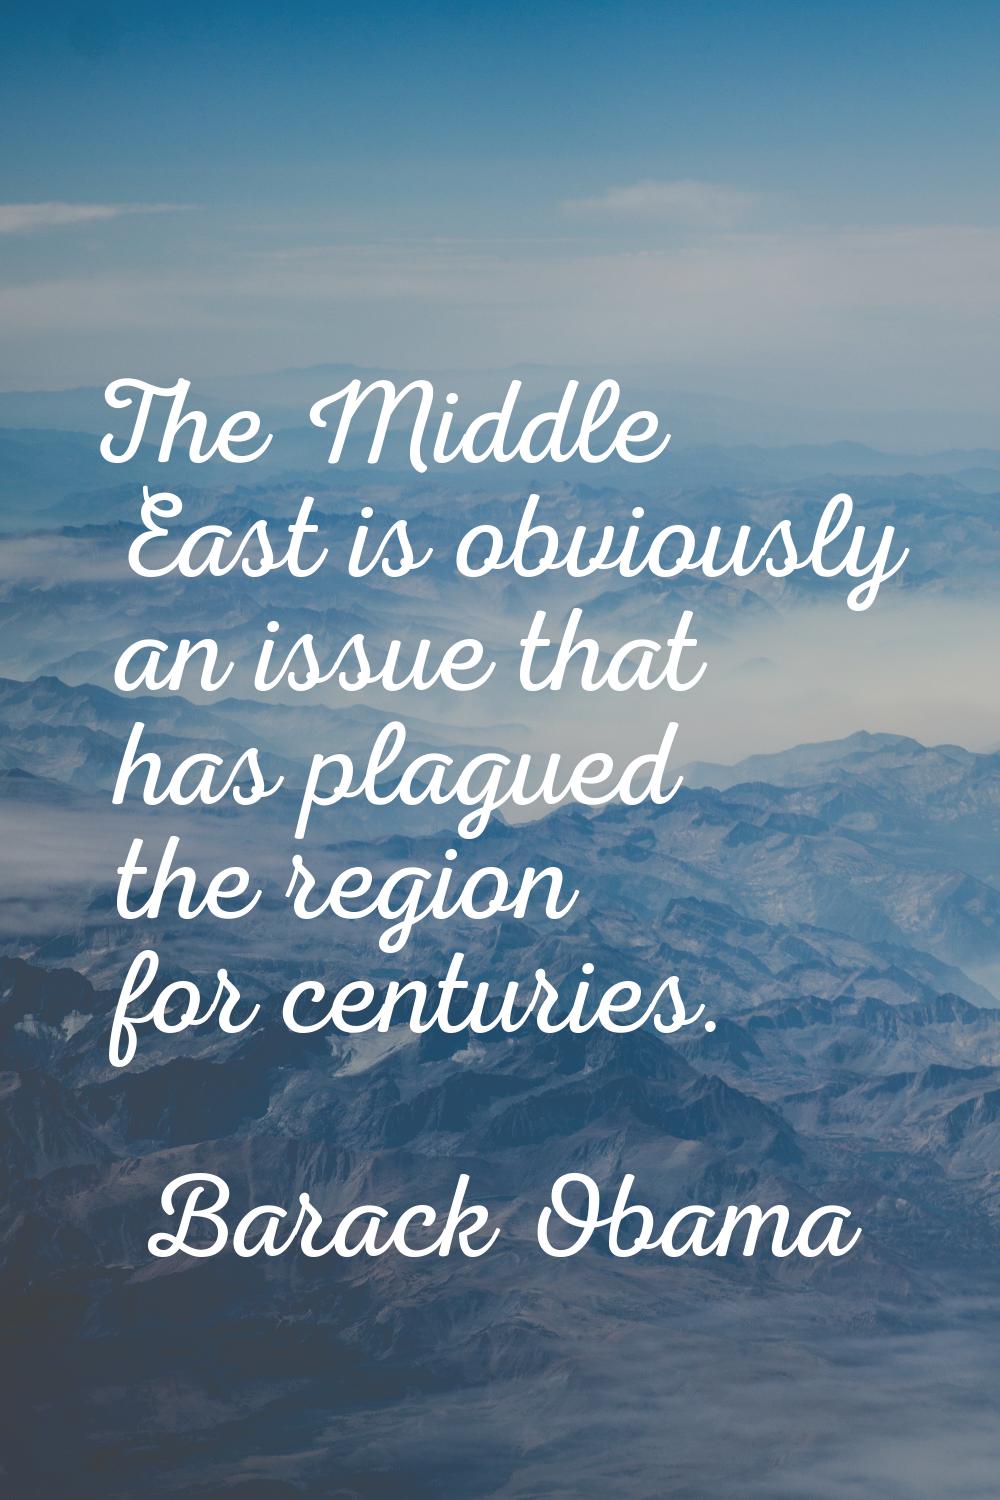 The Middle East is obviously an issue that has plagued the region for centuries.